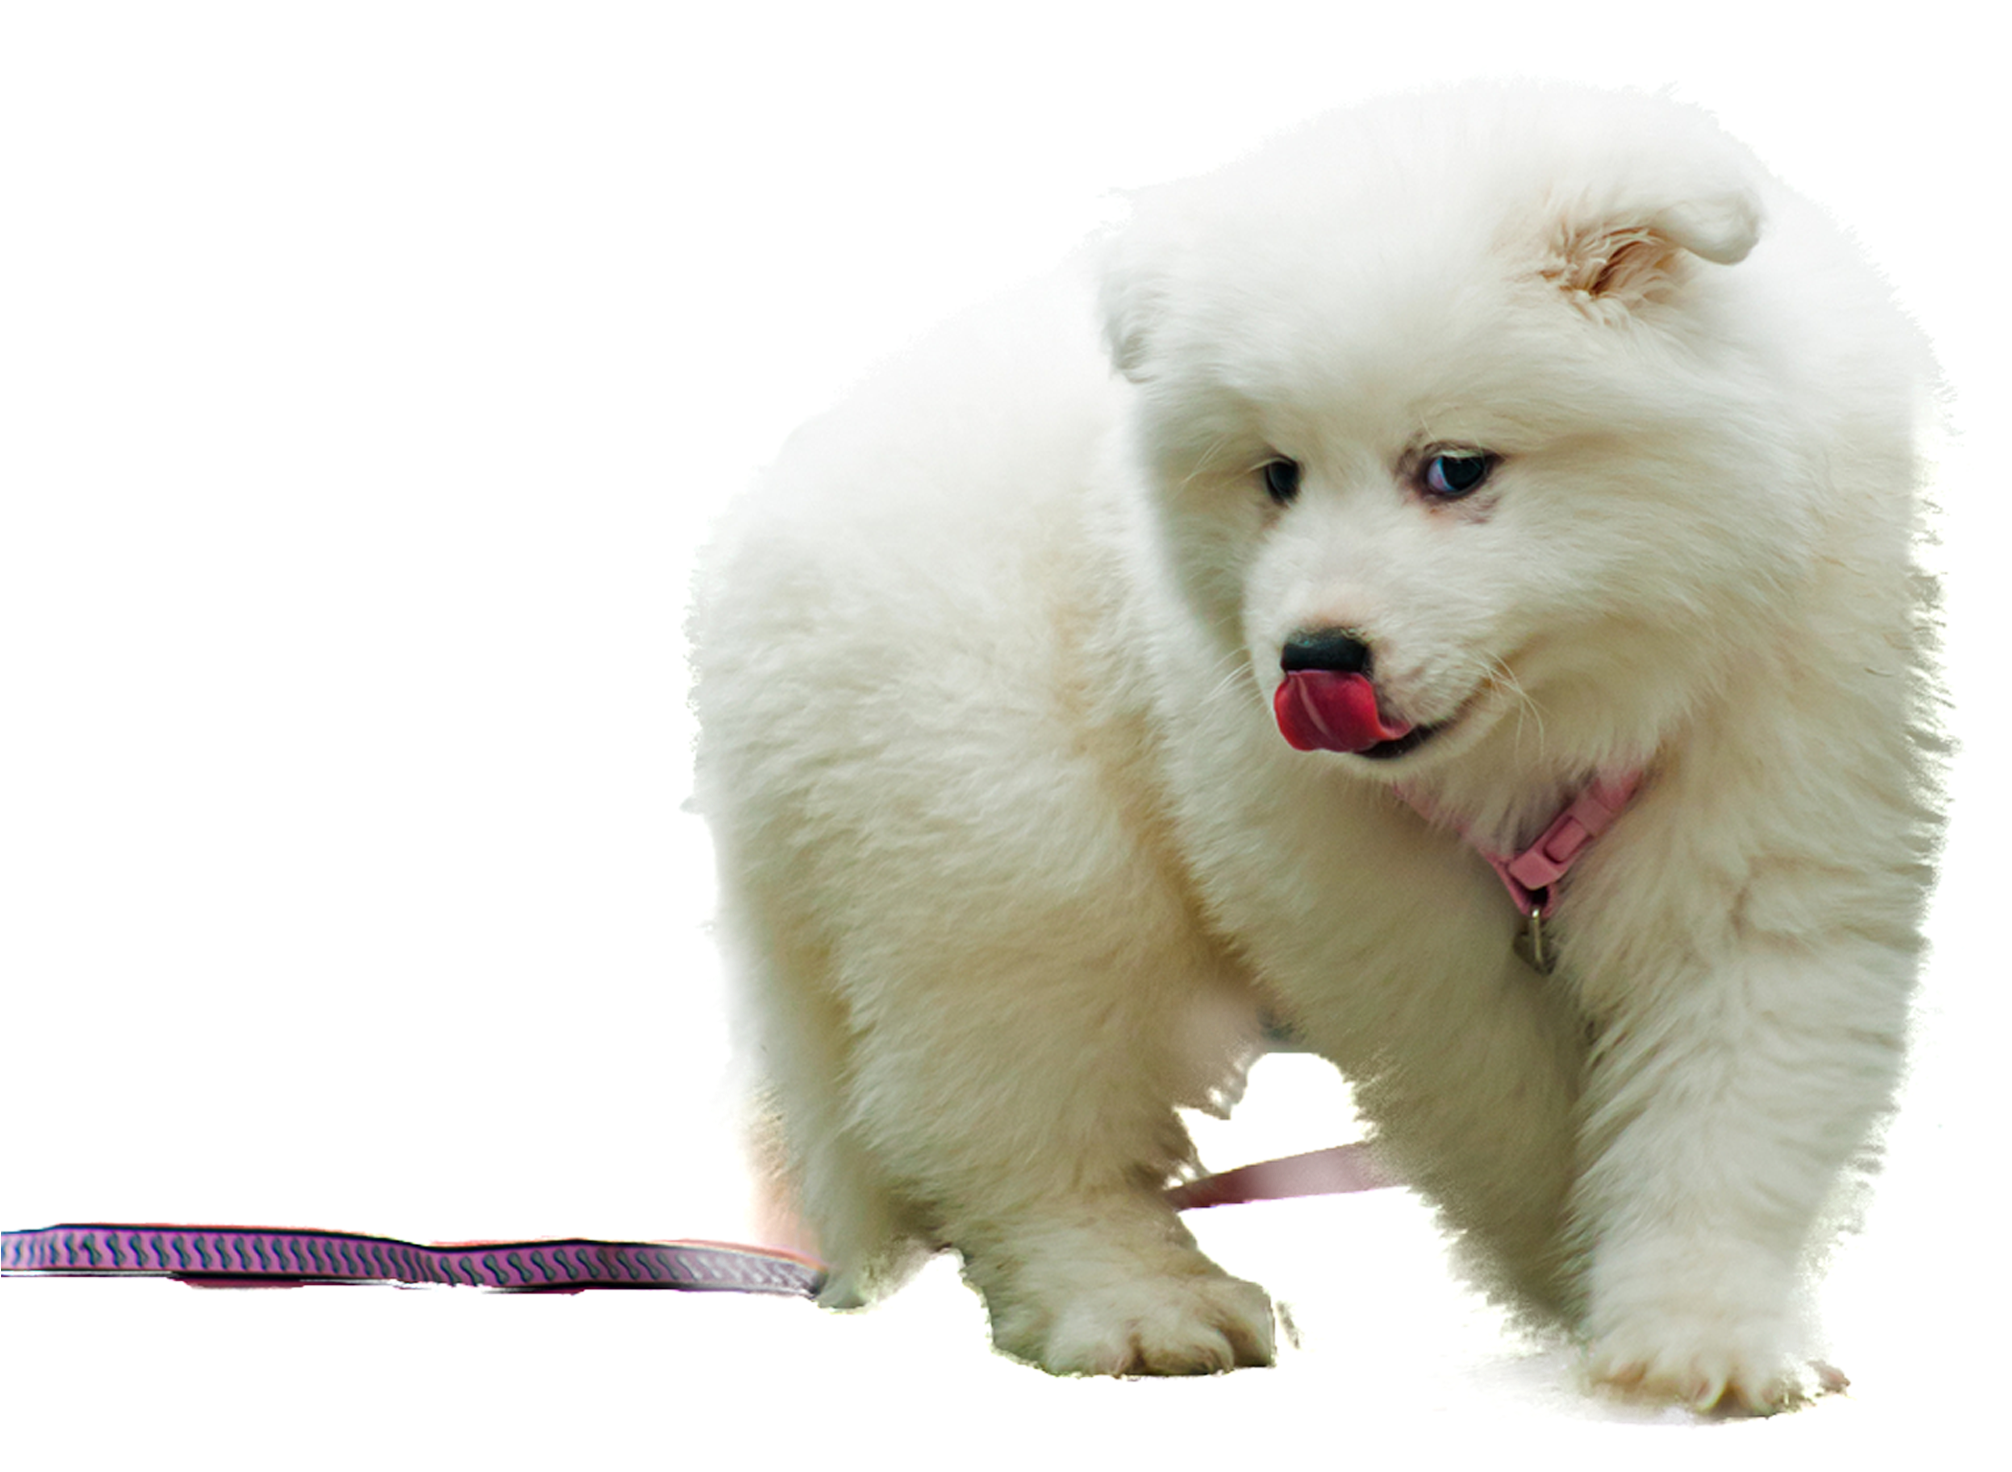 A White Dog With A Pink Leash